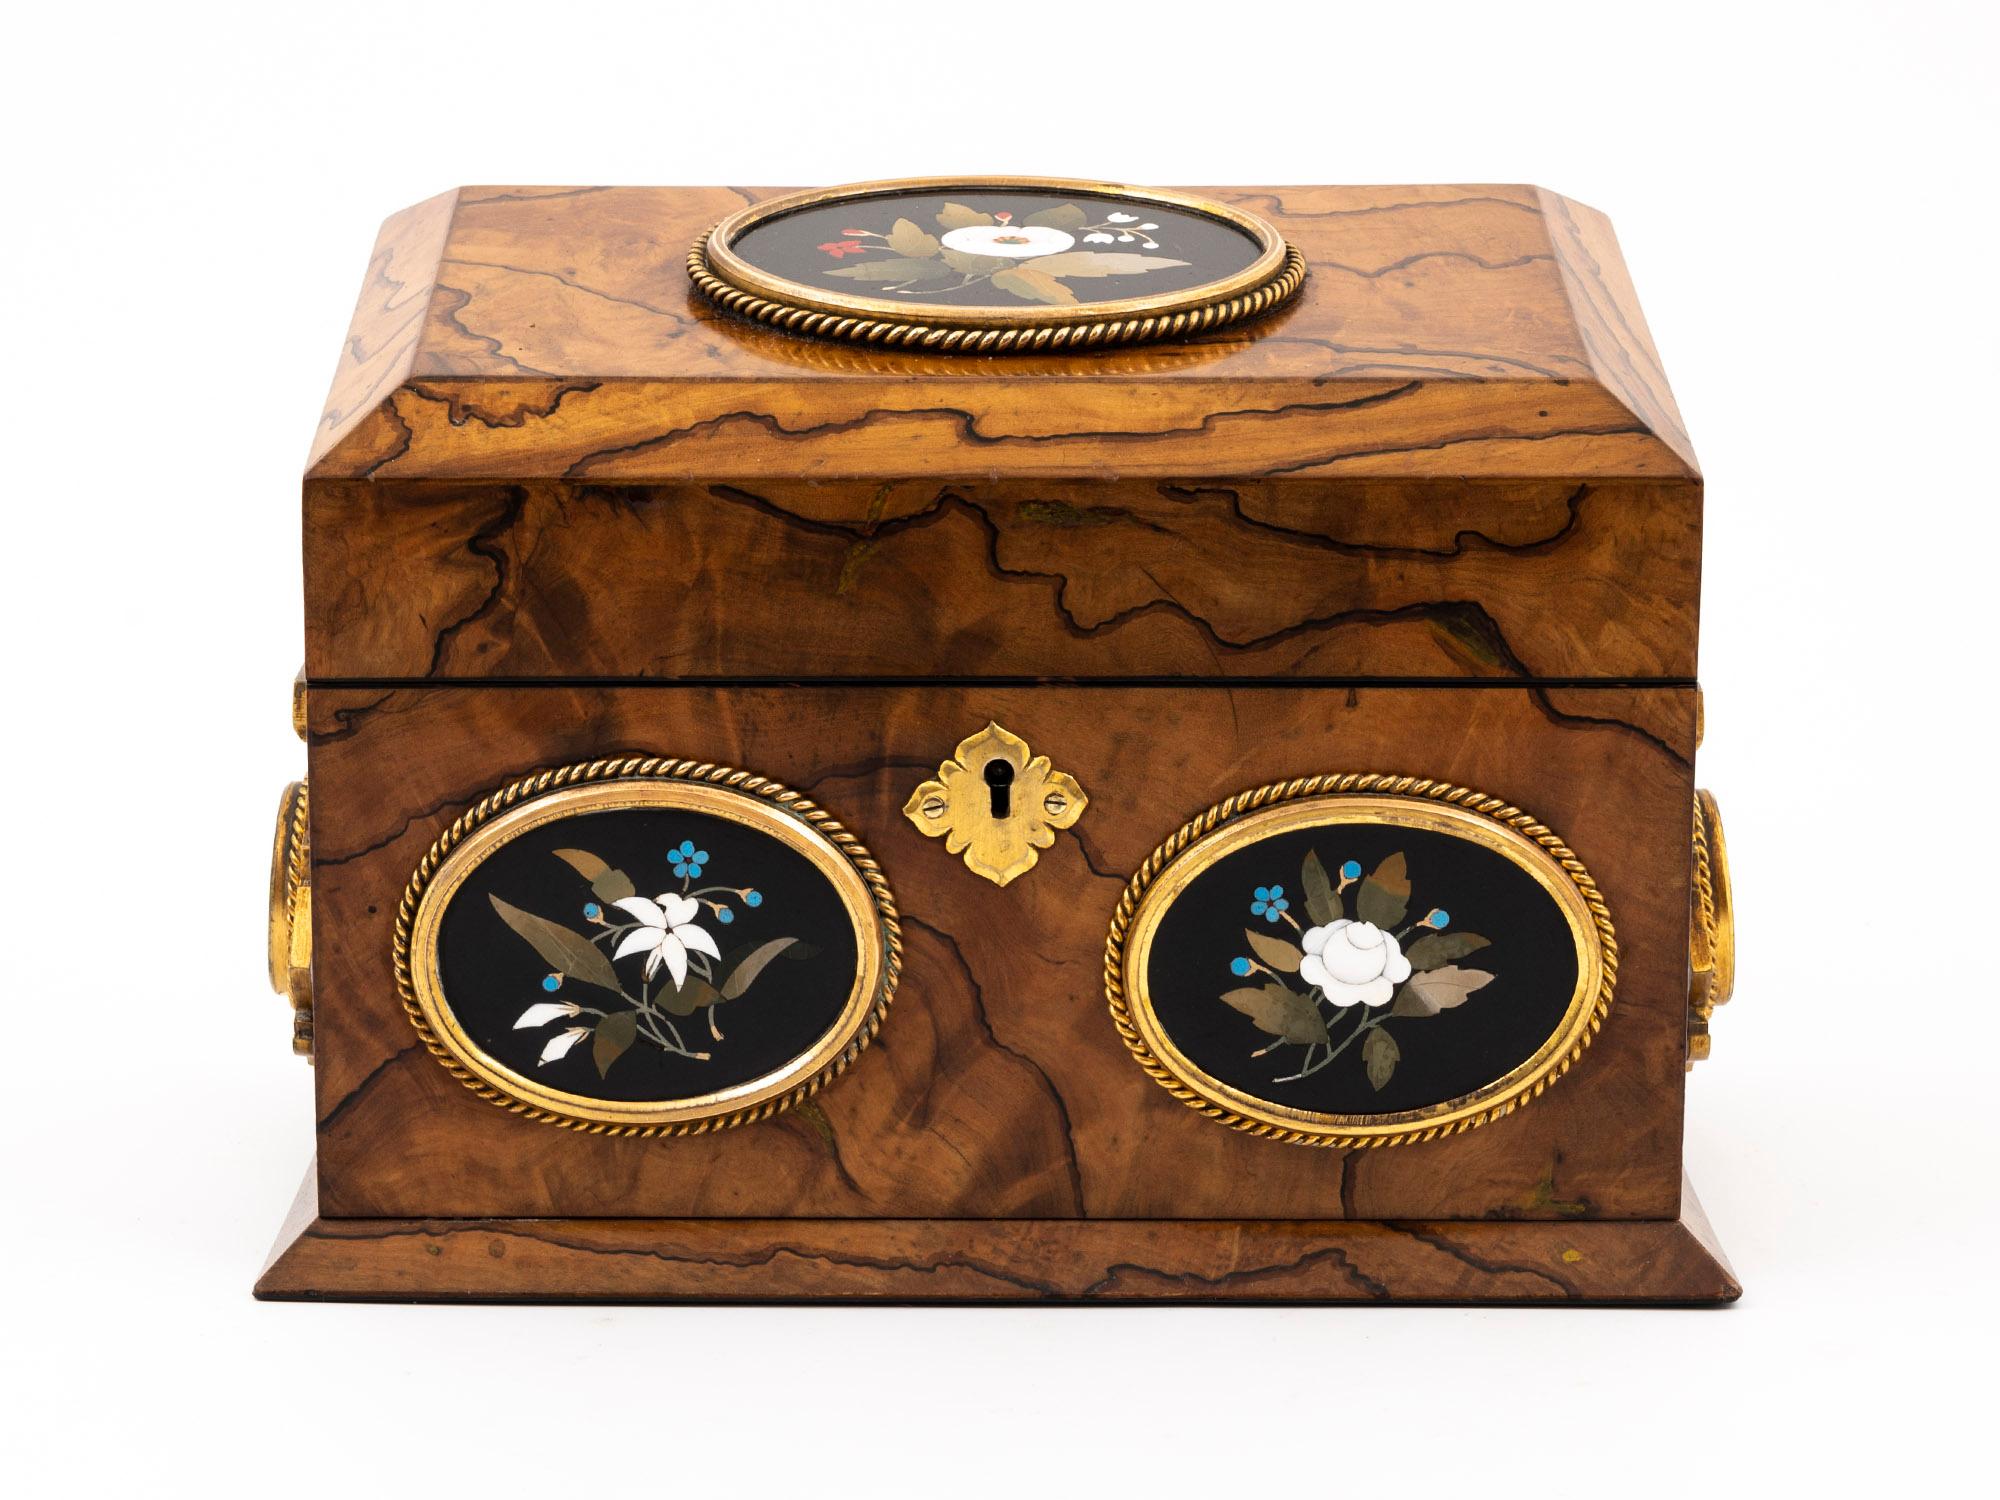 This Classic Antique Feathered Olivewood Stationery Box is attributed to famous cabinet makers Betjemann & Son.

This stunning small Stationery Box has floral sprays made from Ashford marble in the Pietra Dura style; these are exquisitely framed by